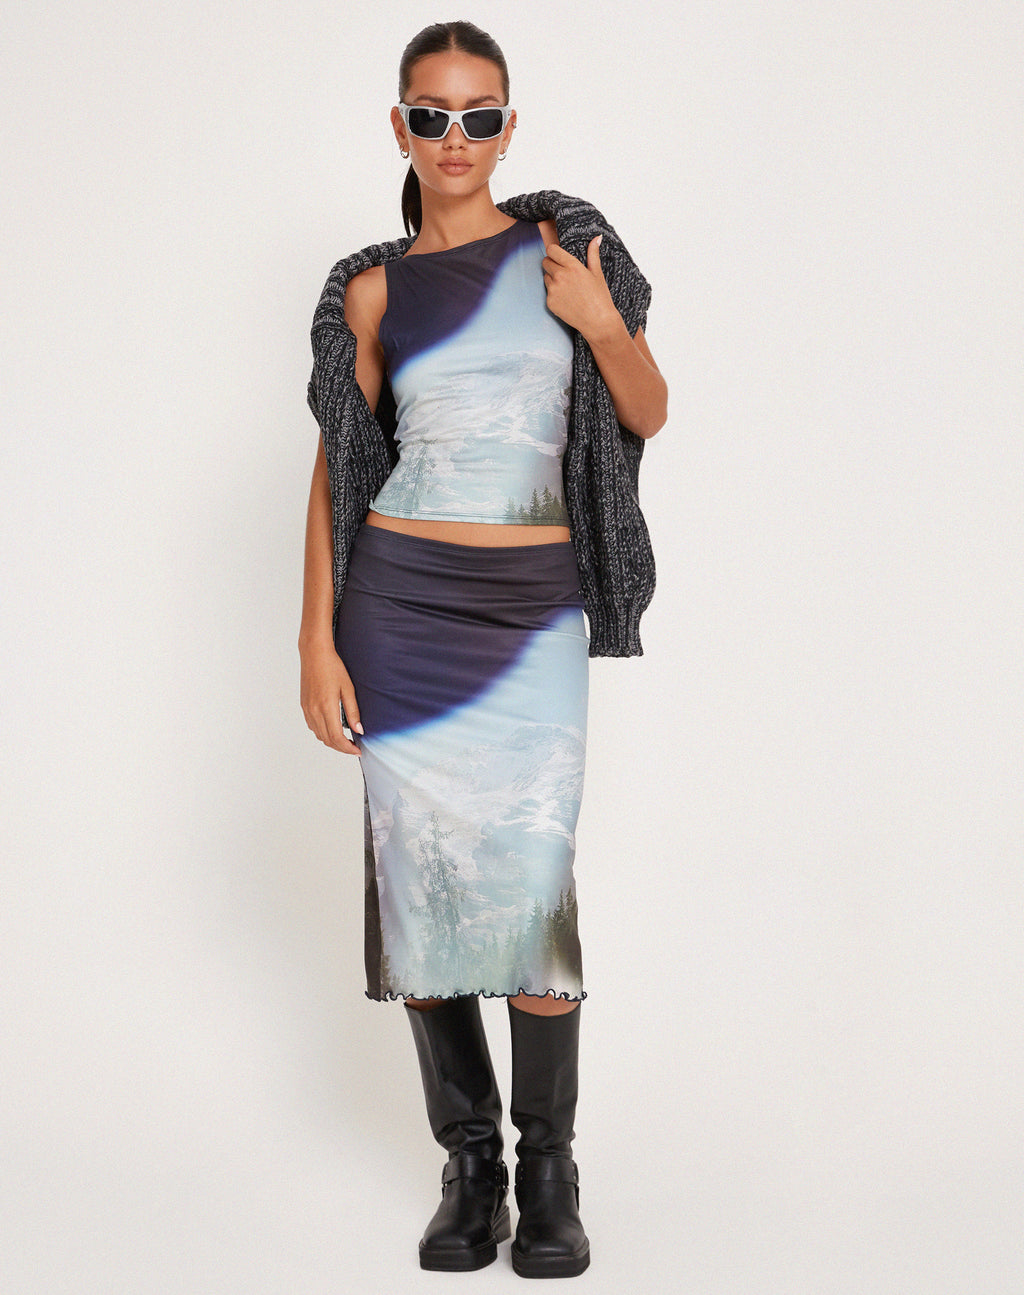 Rujha Midi Skirt in Abstract Landscape Collage